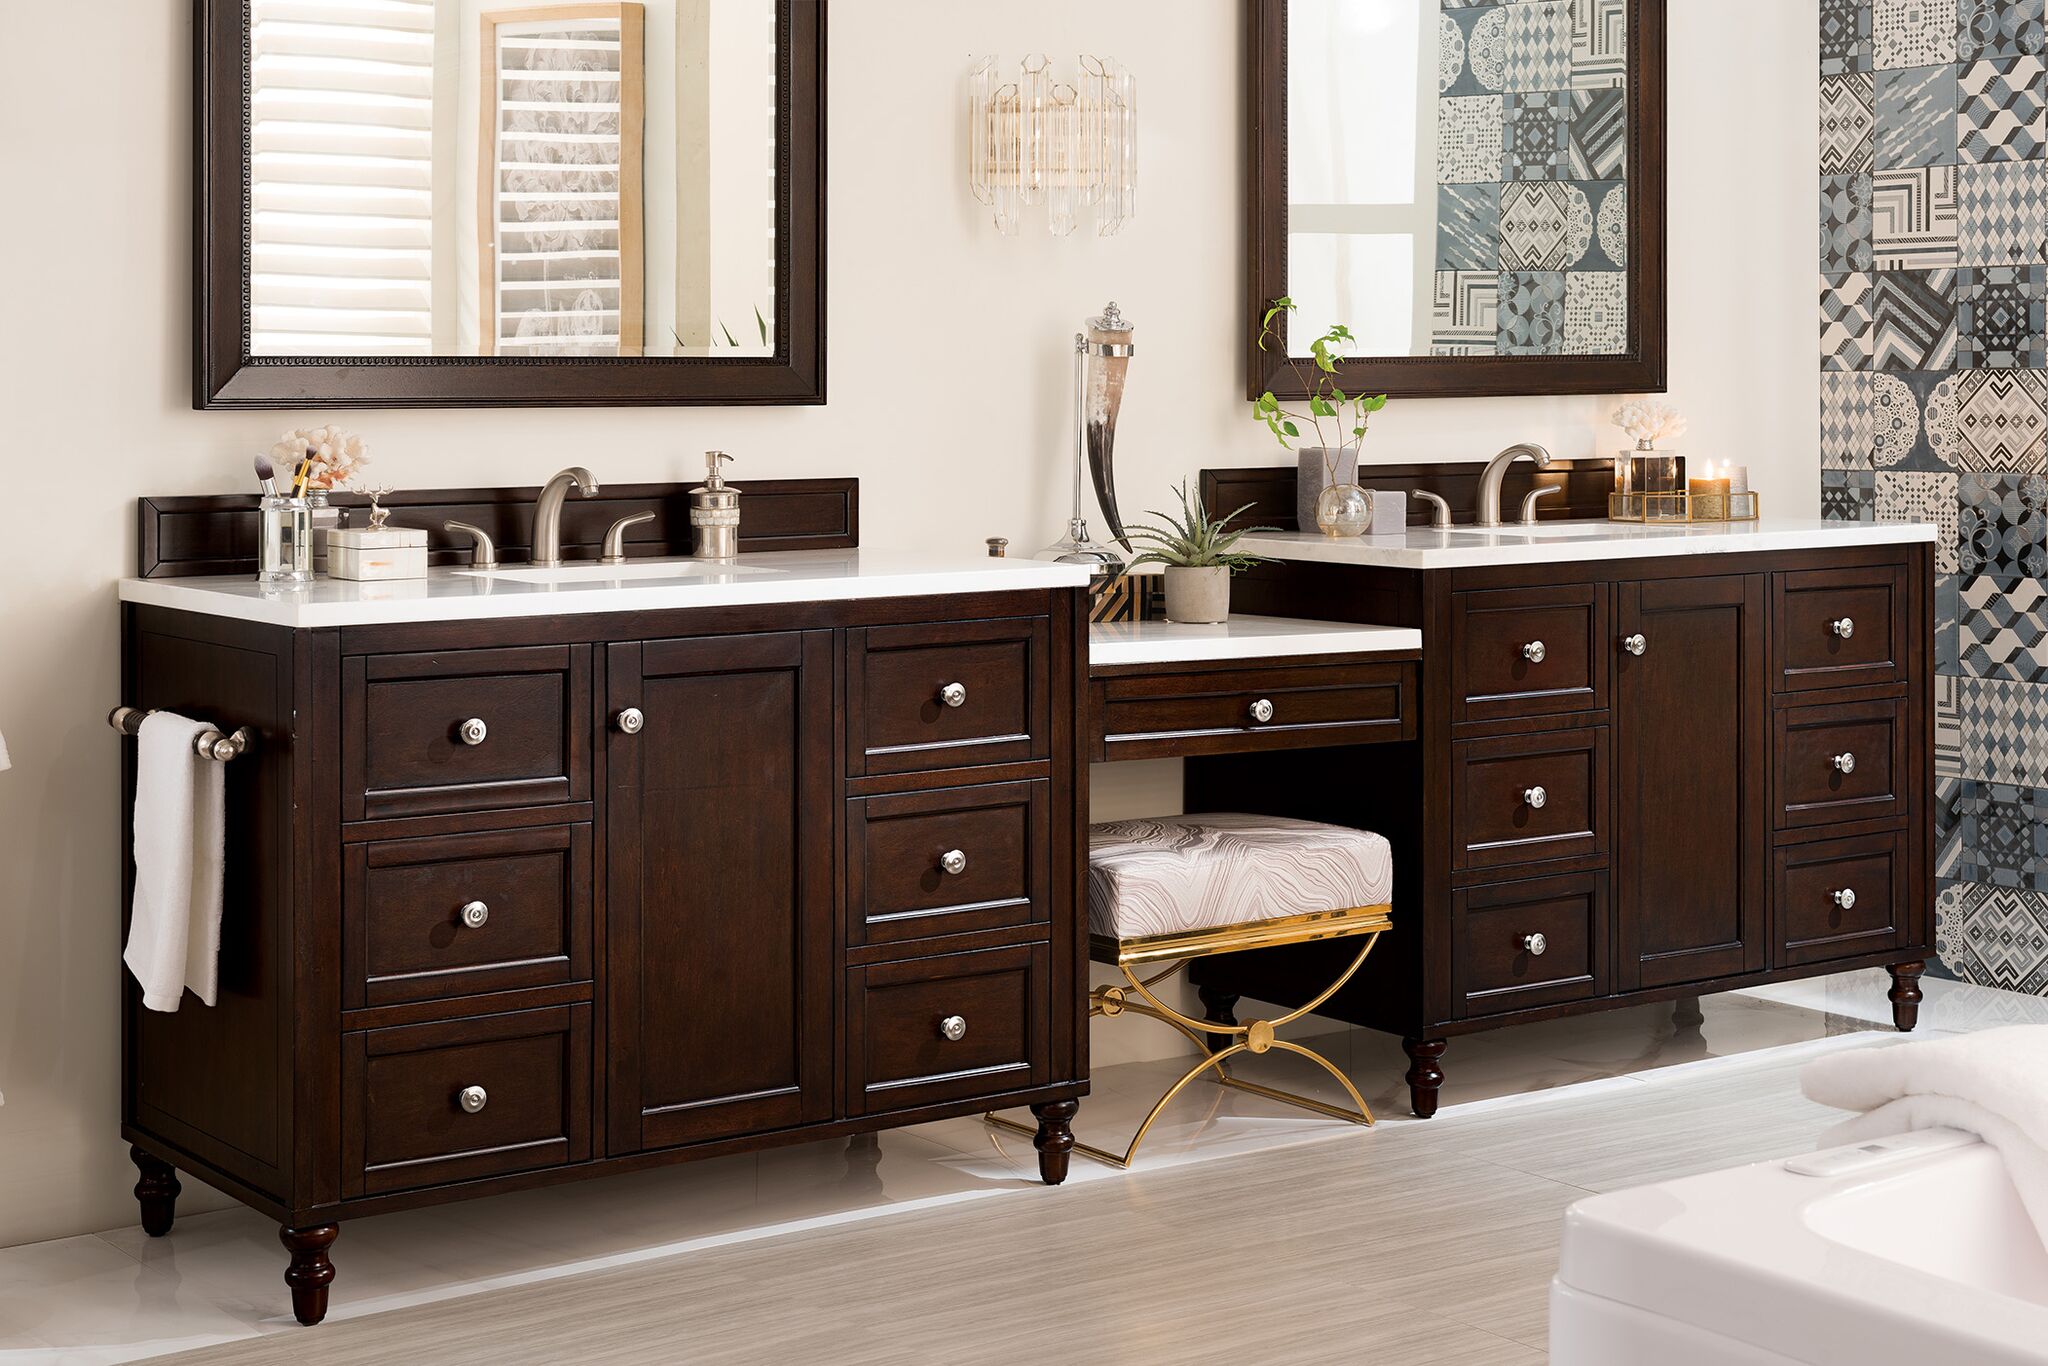 James Martin Copper Cove Encore, Bathroom Vanity With Side Makeup Table